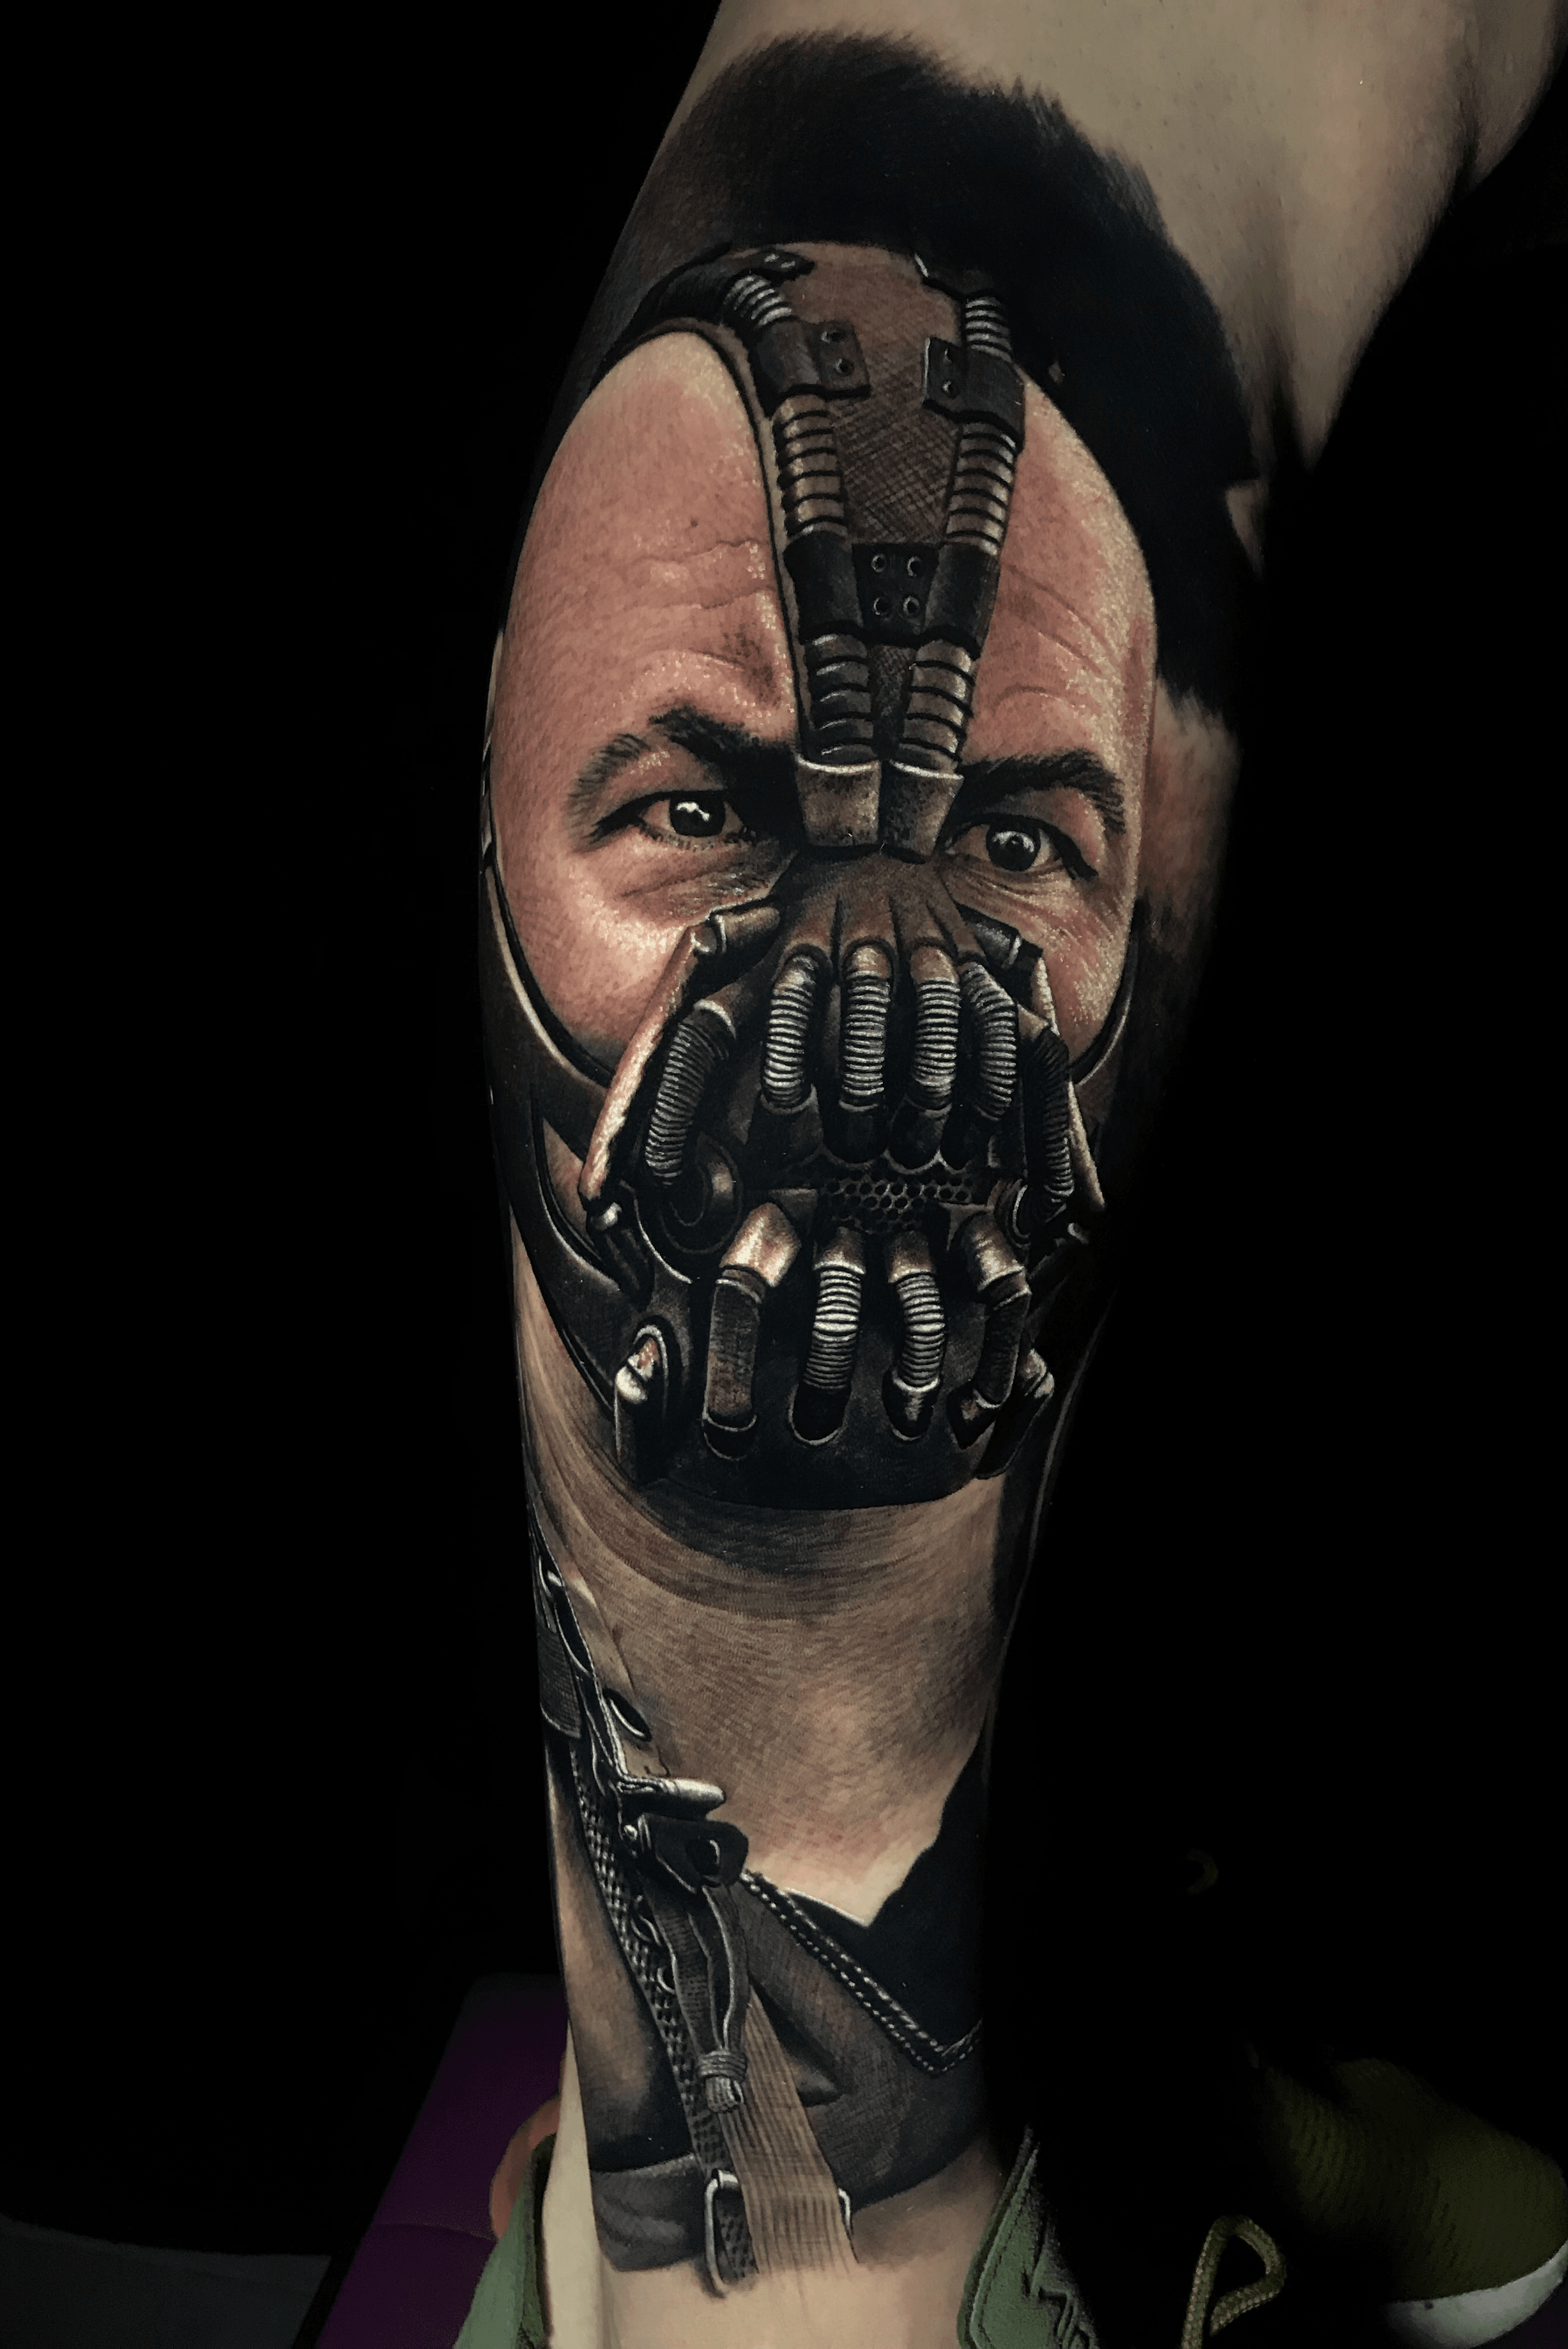 50 Bane Tattoo Designs For Men  Manly Ink Ideas  Tattoo designs men  Tattoos Tattoo designs